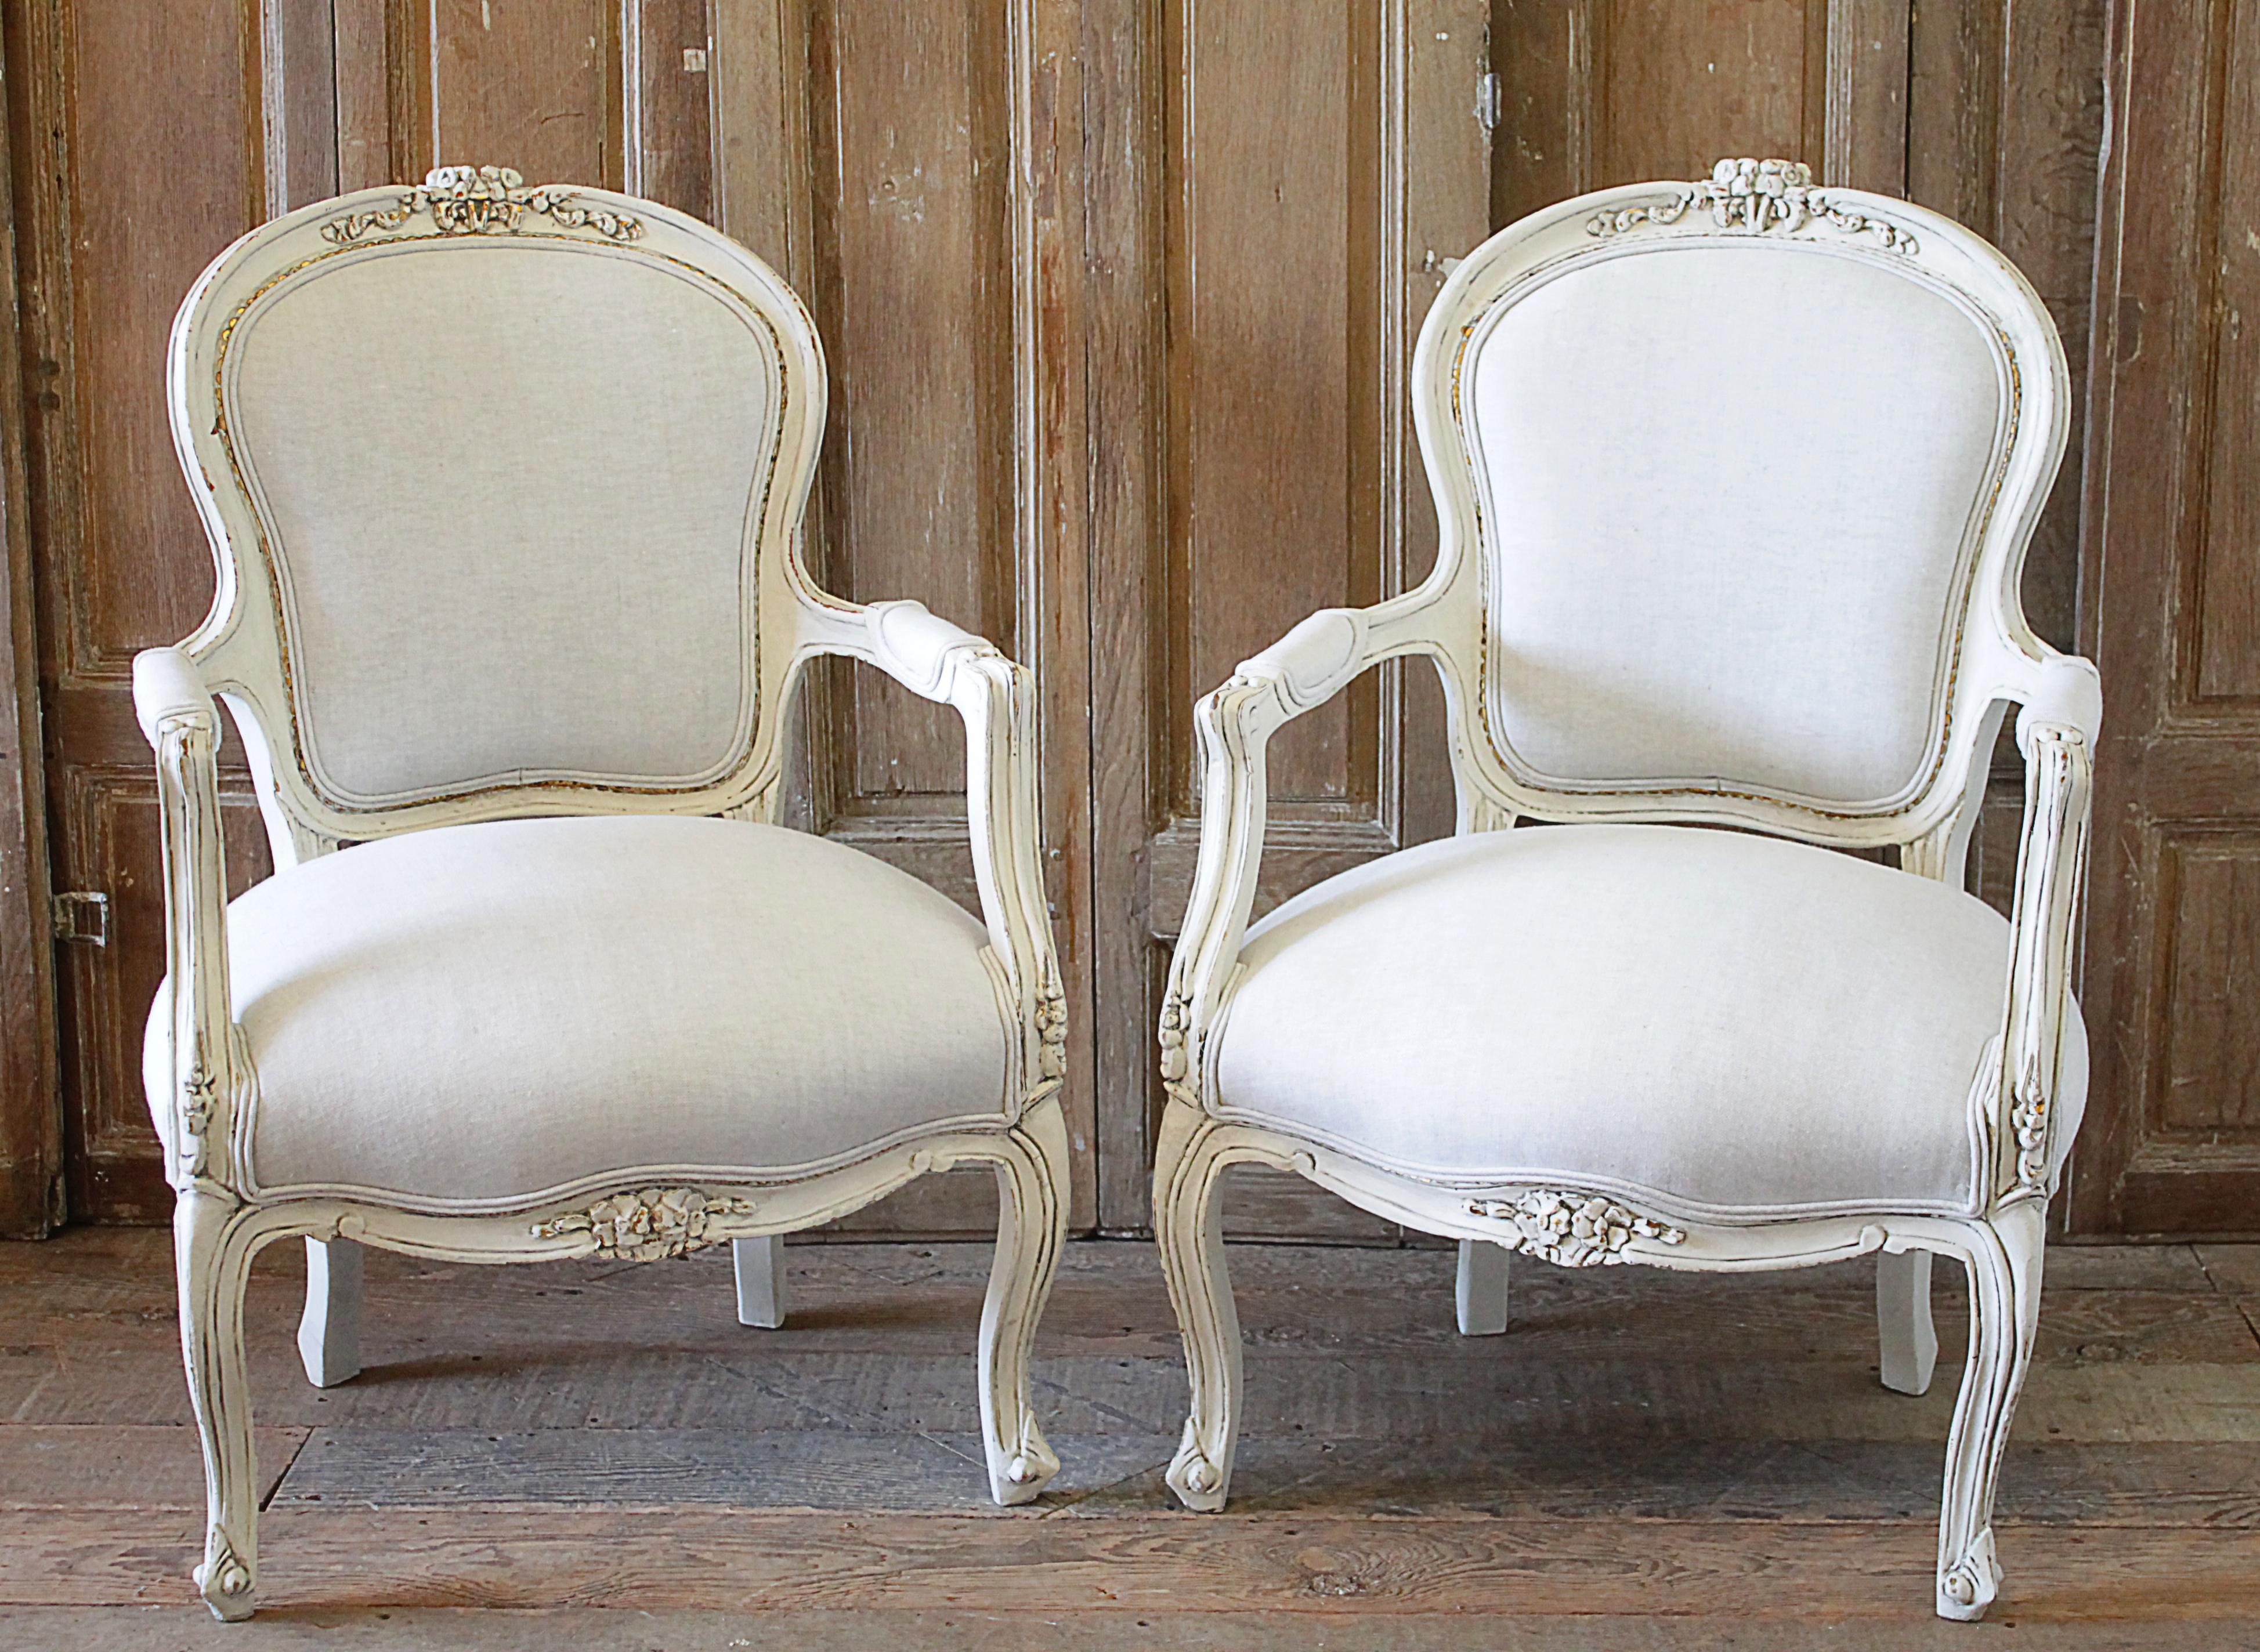 20th century pair of painted and upholstered Louis XV style open armchairs. Beautiful pair of painted chairs in our oyster white finish, with subtle distressed edges, and finished with an antique glazed patina. Classic Louis XV style. Reupholstered